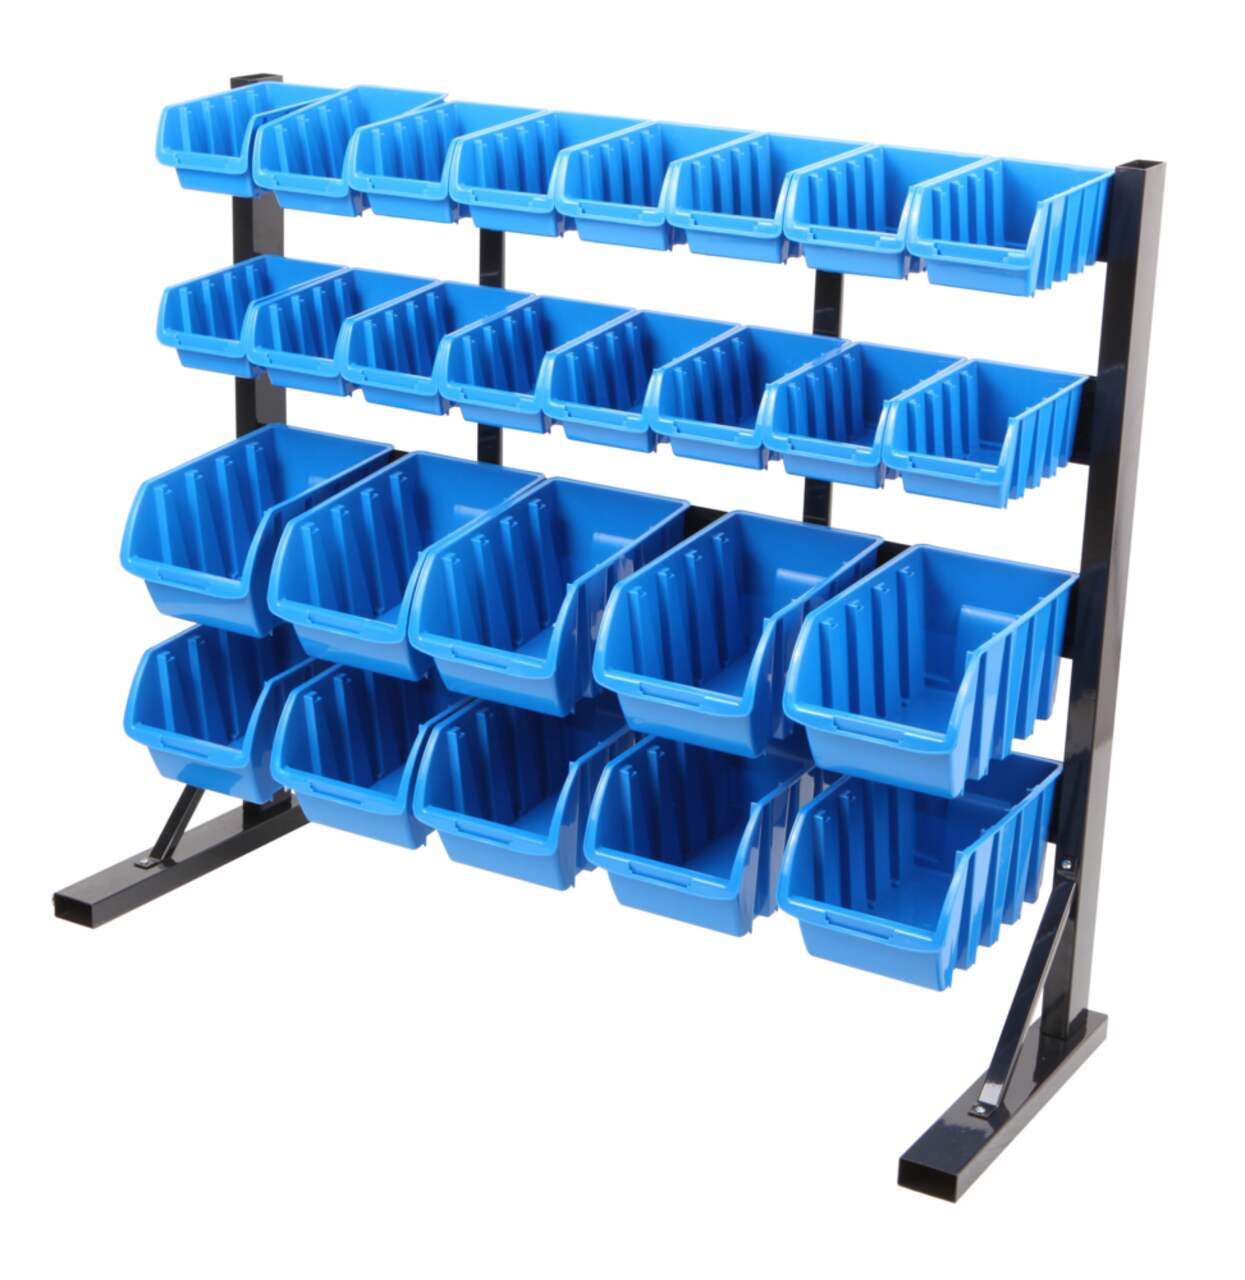 https://media-www.canadiantire.ca/product/fixing/tools/tool-storage/0581542/mastercraft-26-bin-parts-rack-8d368c25-2e1e-4641-9f41-48d95a7358a9.png?imdensity=1&imwidth=640&impolicy=mZoom